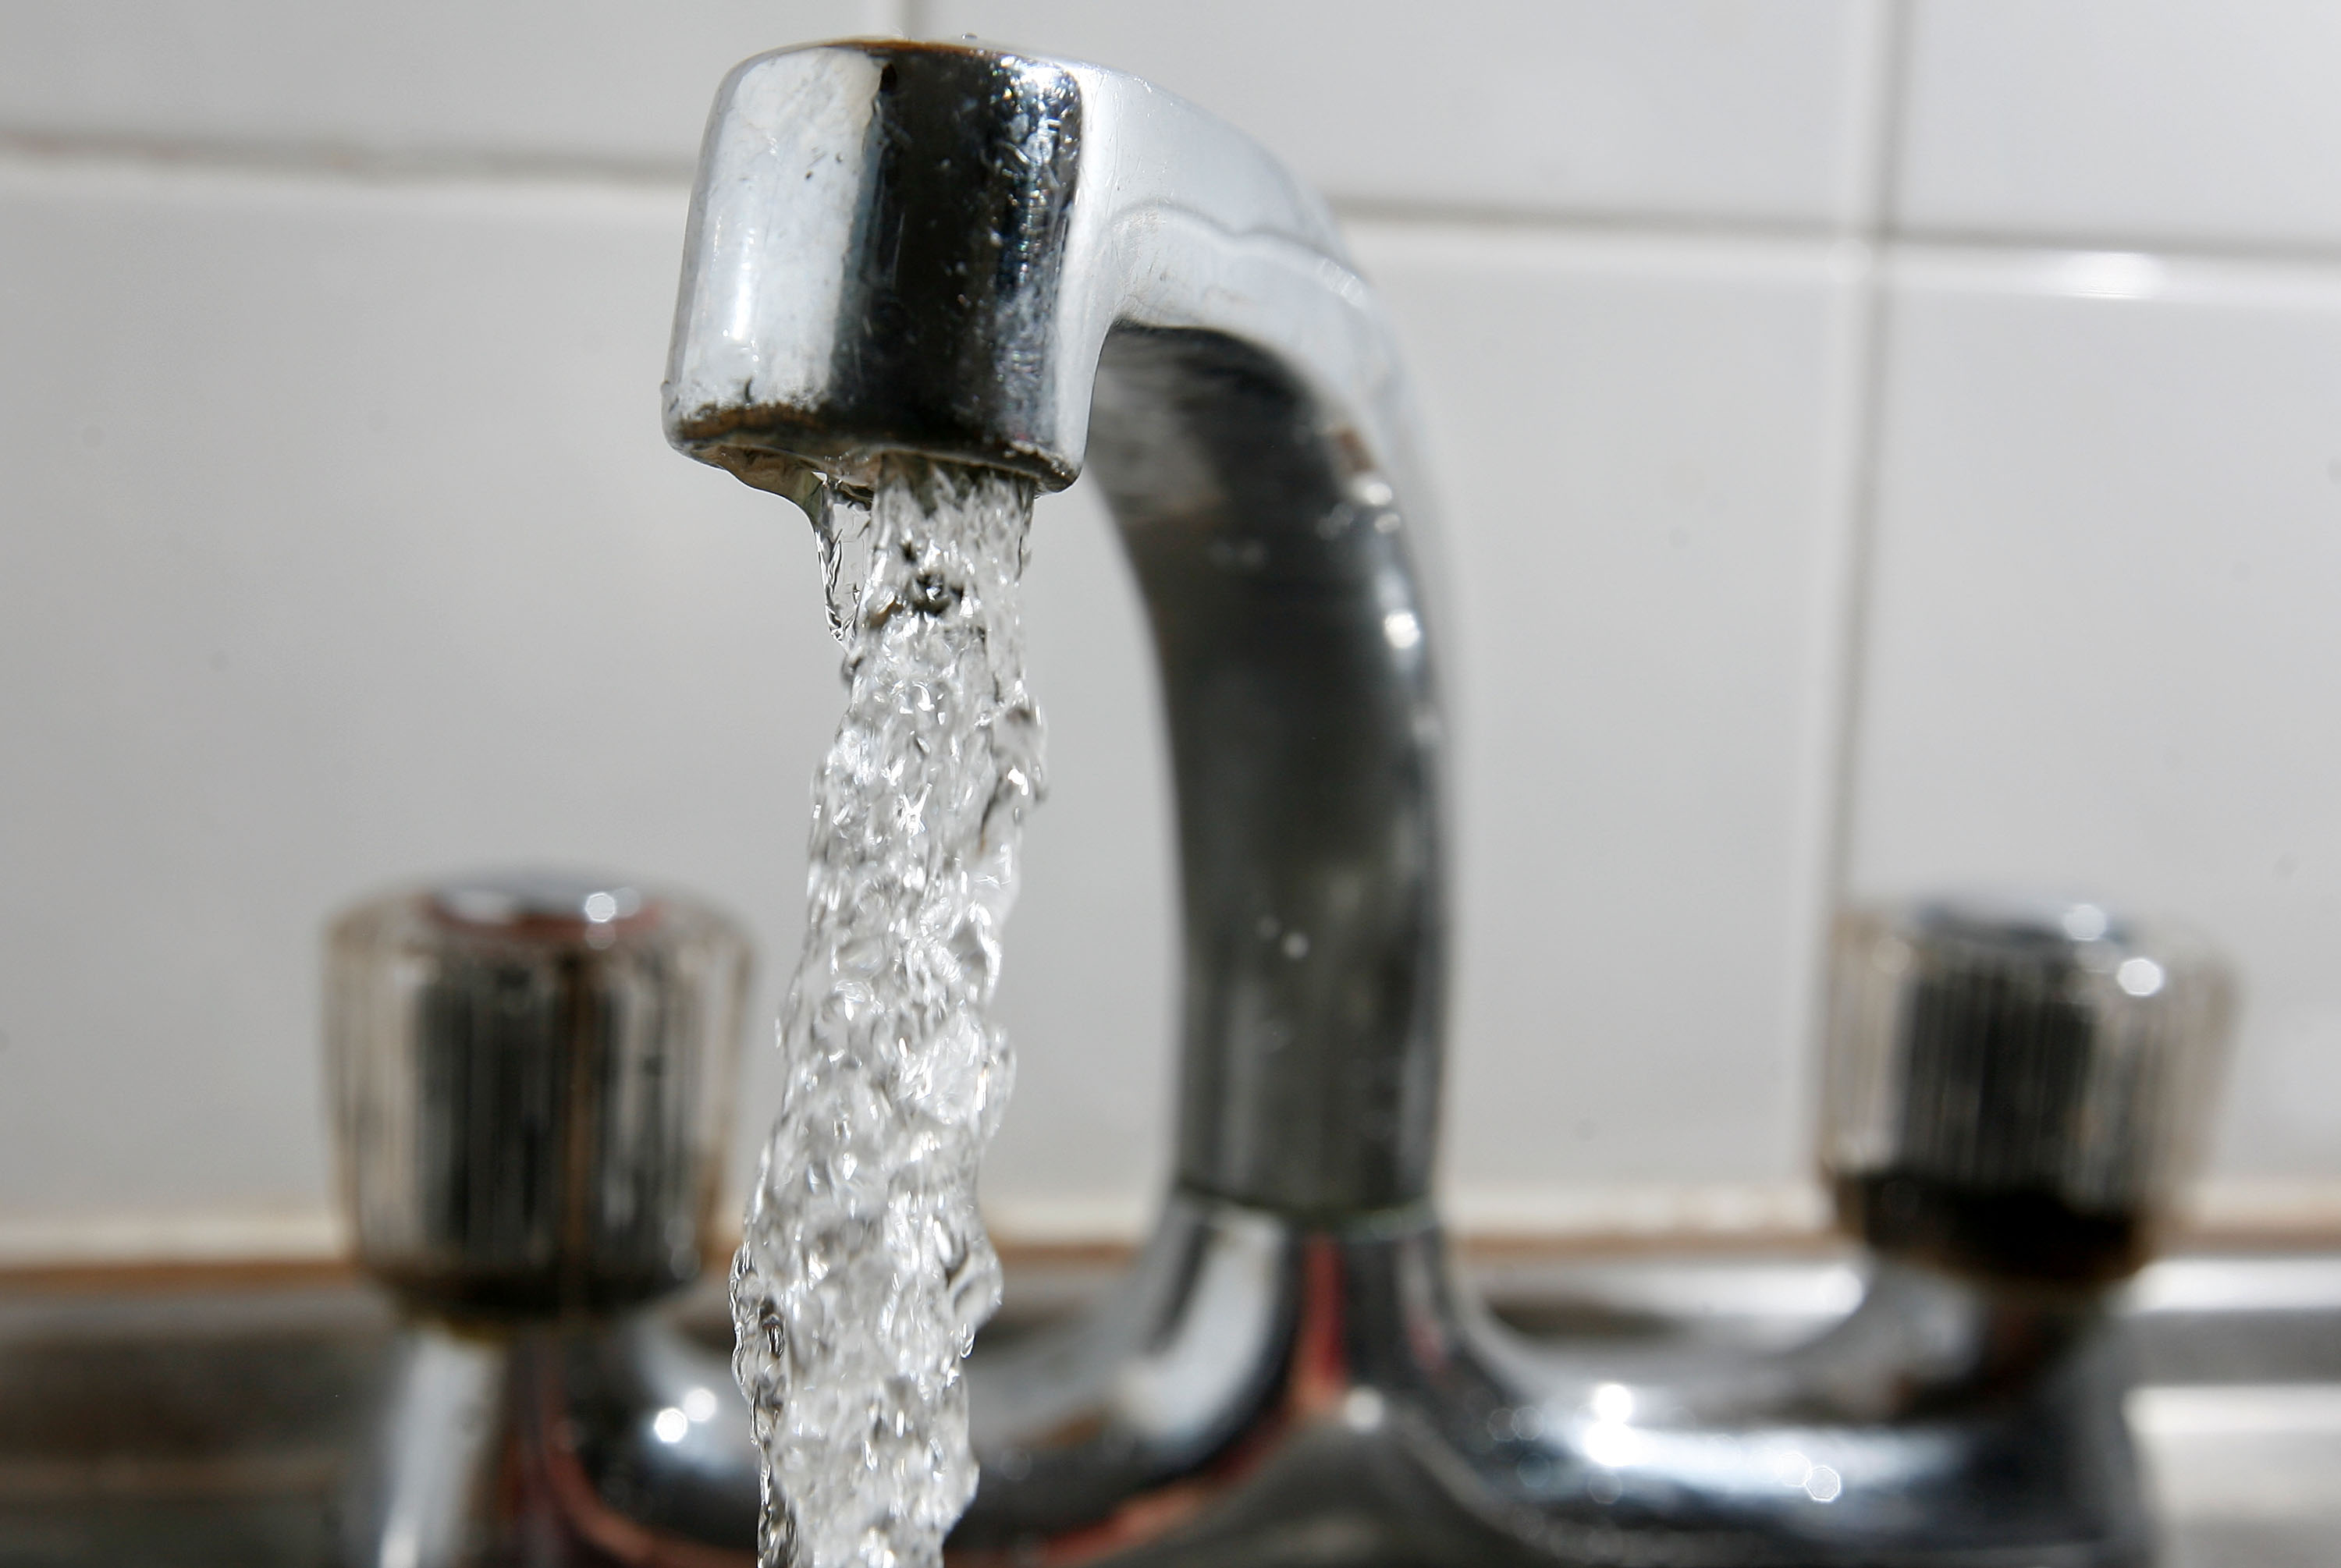 Water firms push for bills in England to rise by up to 40%, say